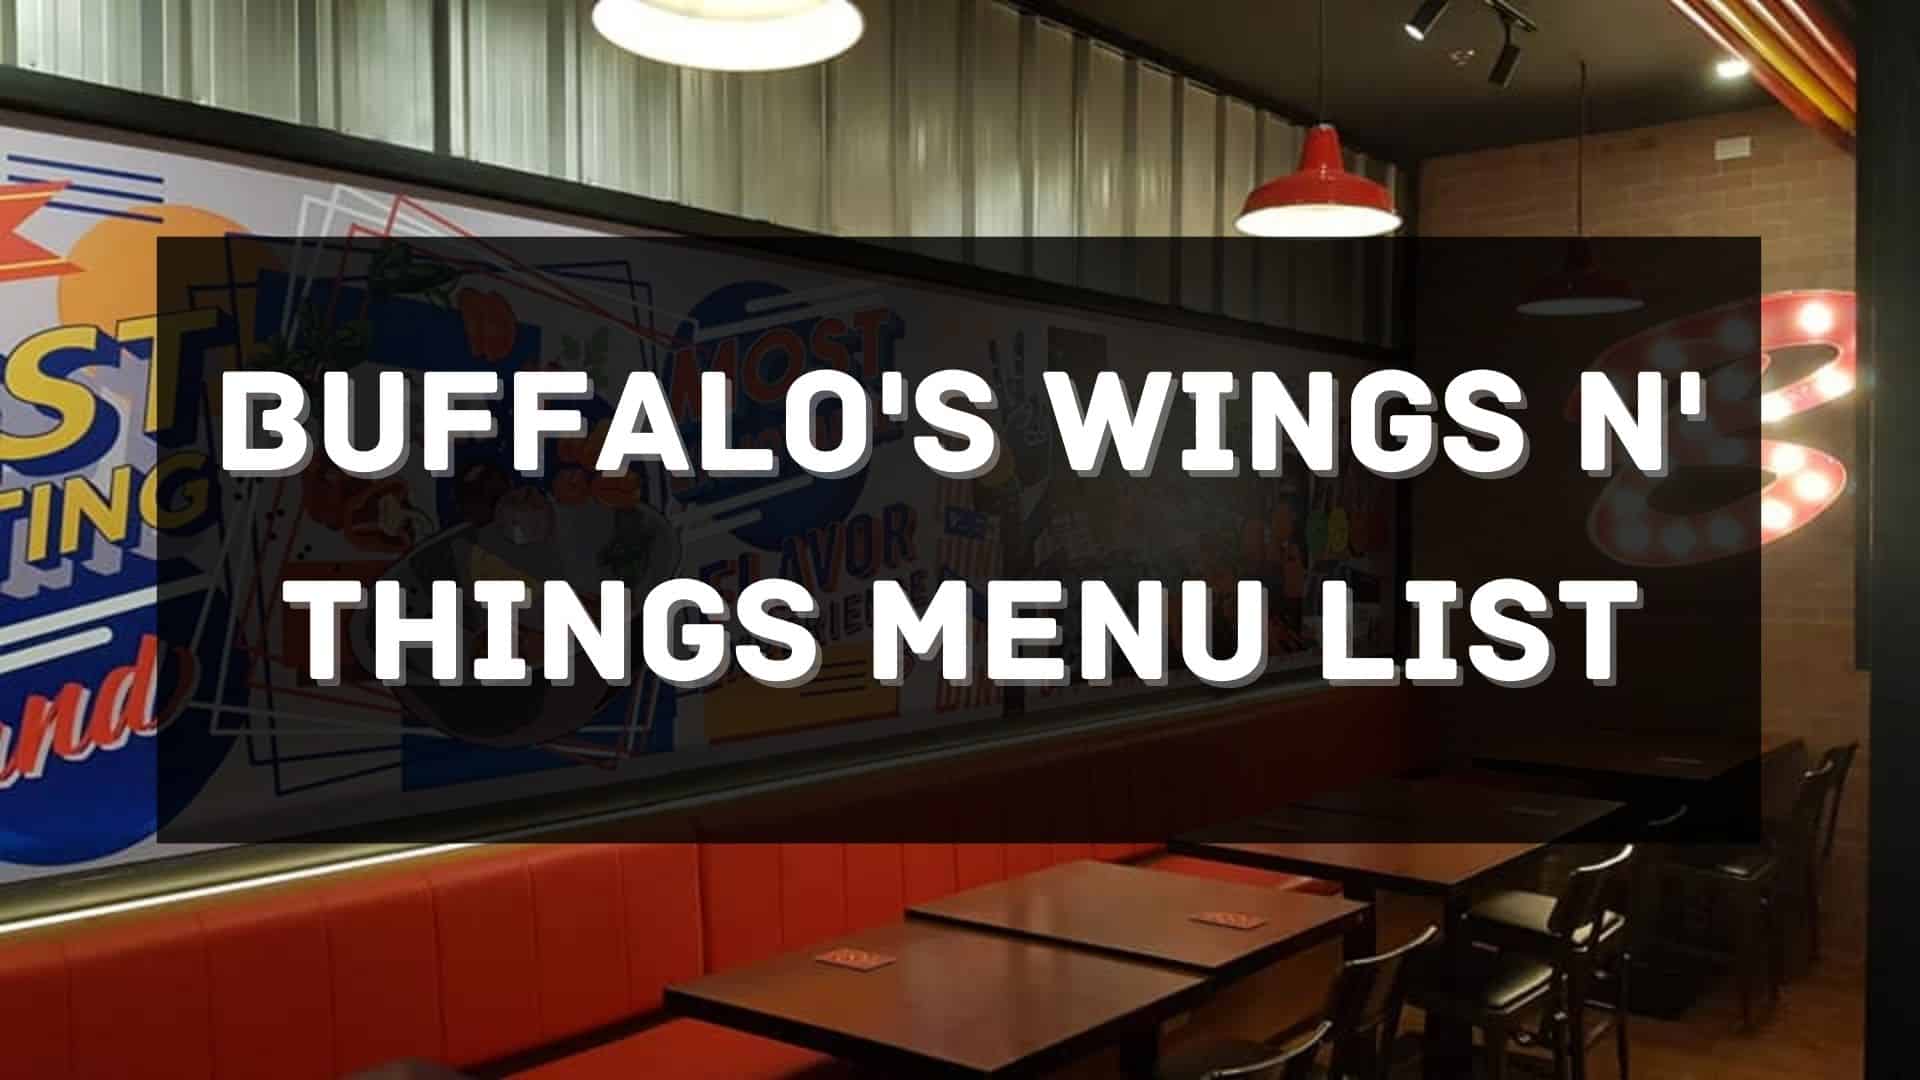 buffalo's wings n' things menu prices philippines